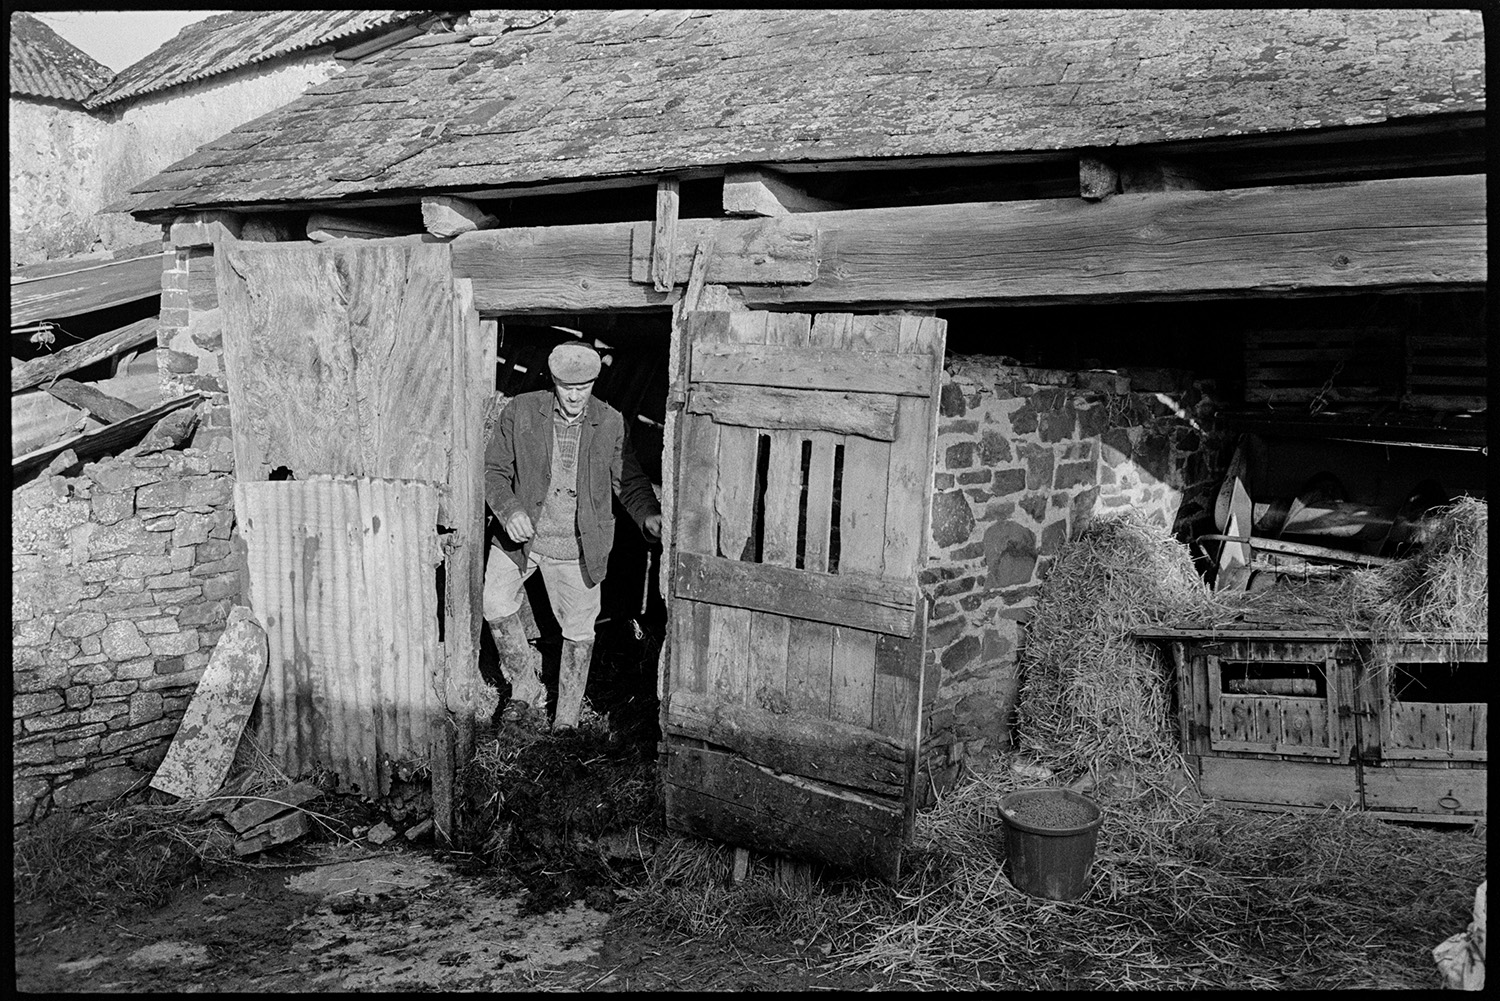 Farmyard, cattle, sheep, implements. 
[Alf Pugsley coming out of a stone barn with a slate roof and wooden beams, in the farmyard at Lower Langham, Dolton.]